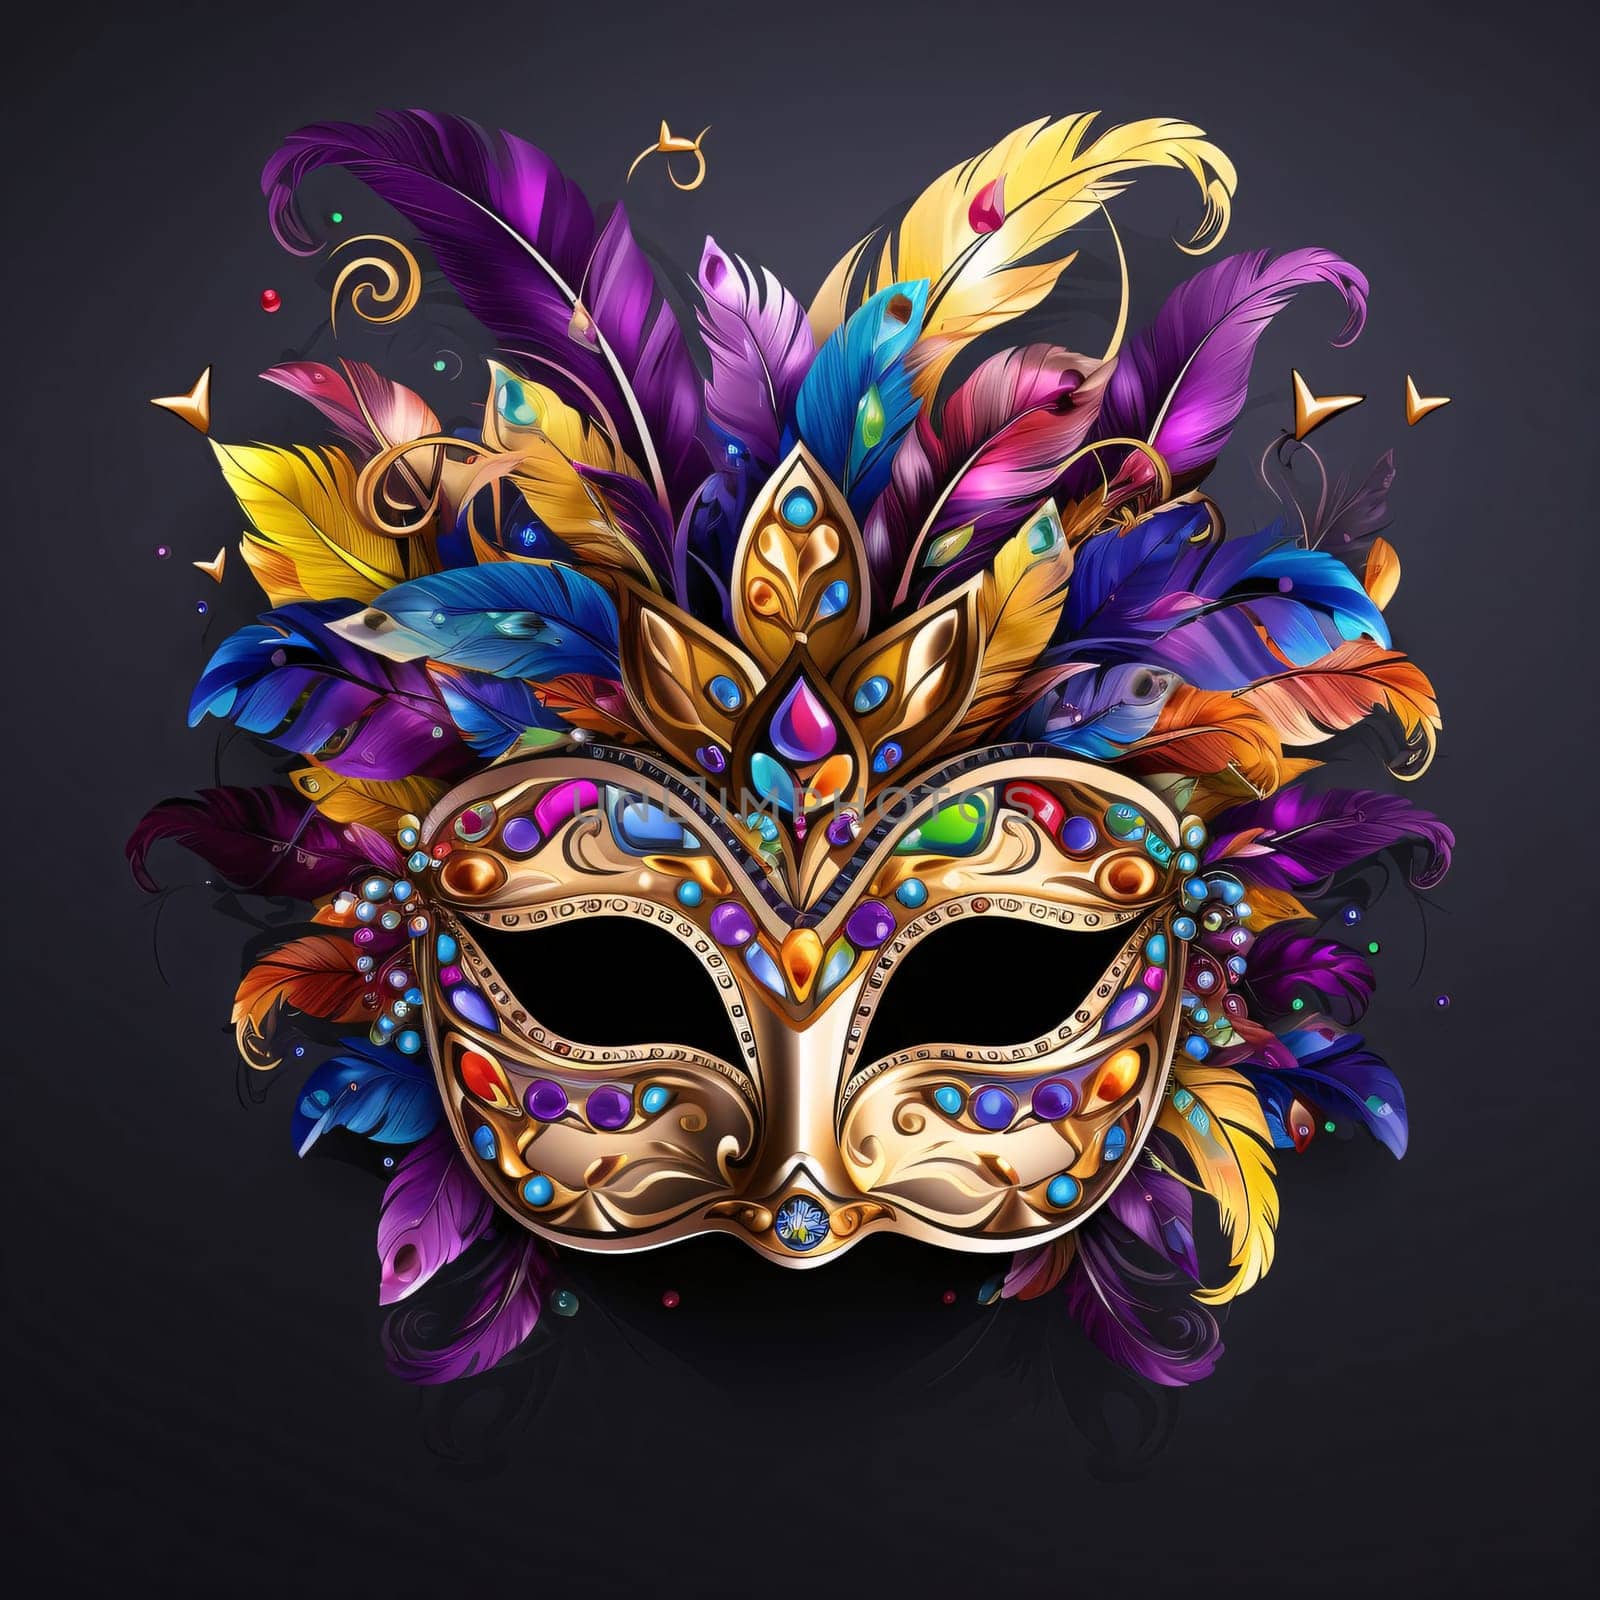 Gold eye mask with colorful decorations and feathers on a dark background. Carnival outfits, masks and decorations. by ThemesS